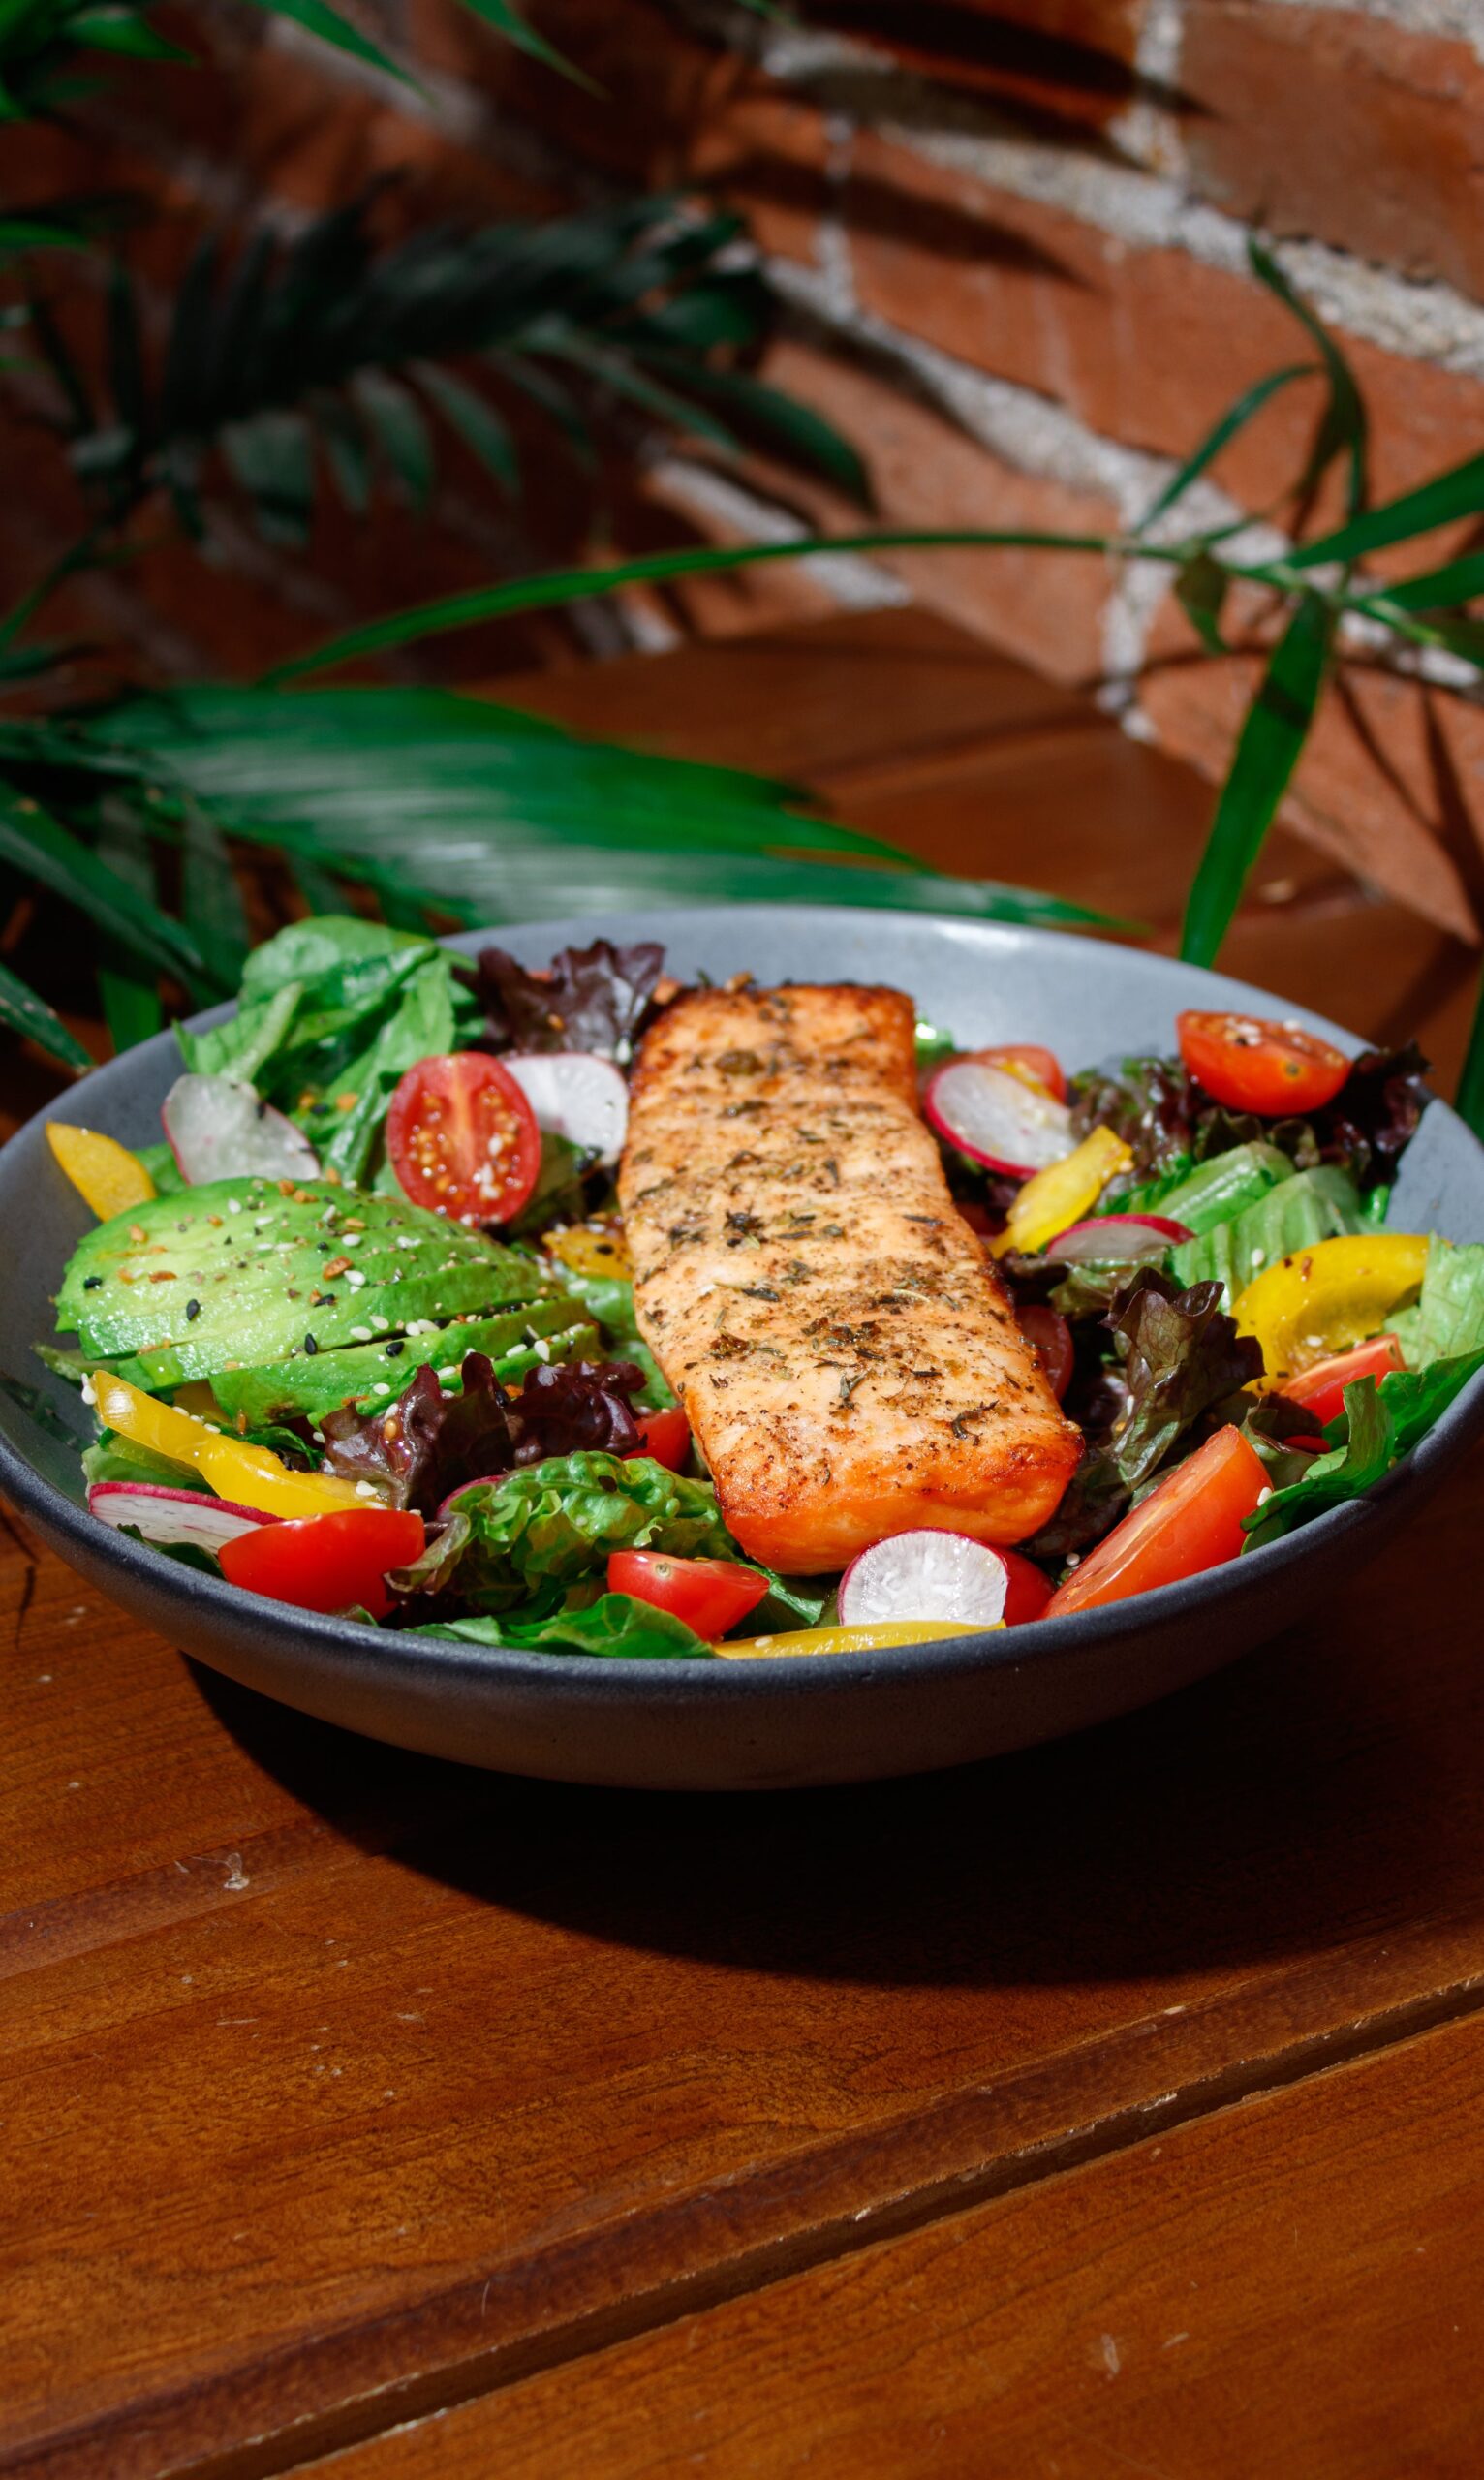 Salmon and avocados are part of a ketogenic diet to heal your brain.